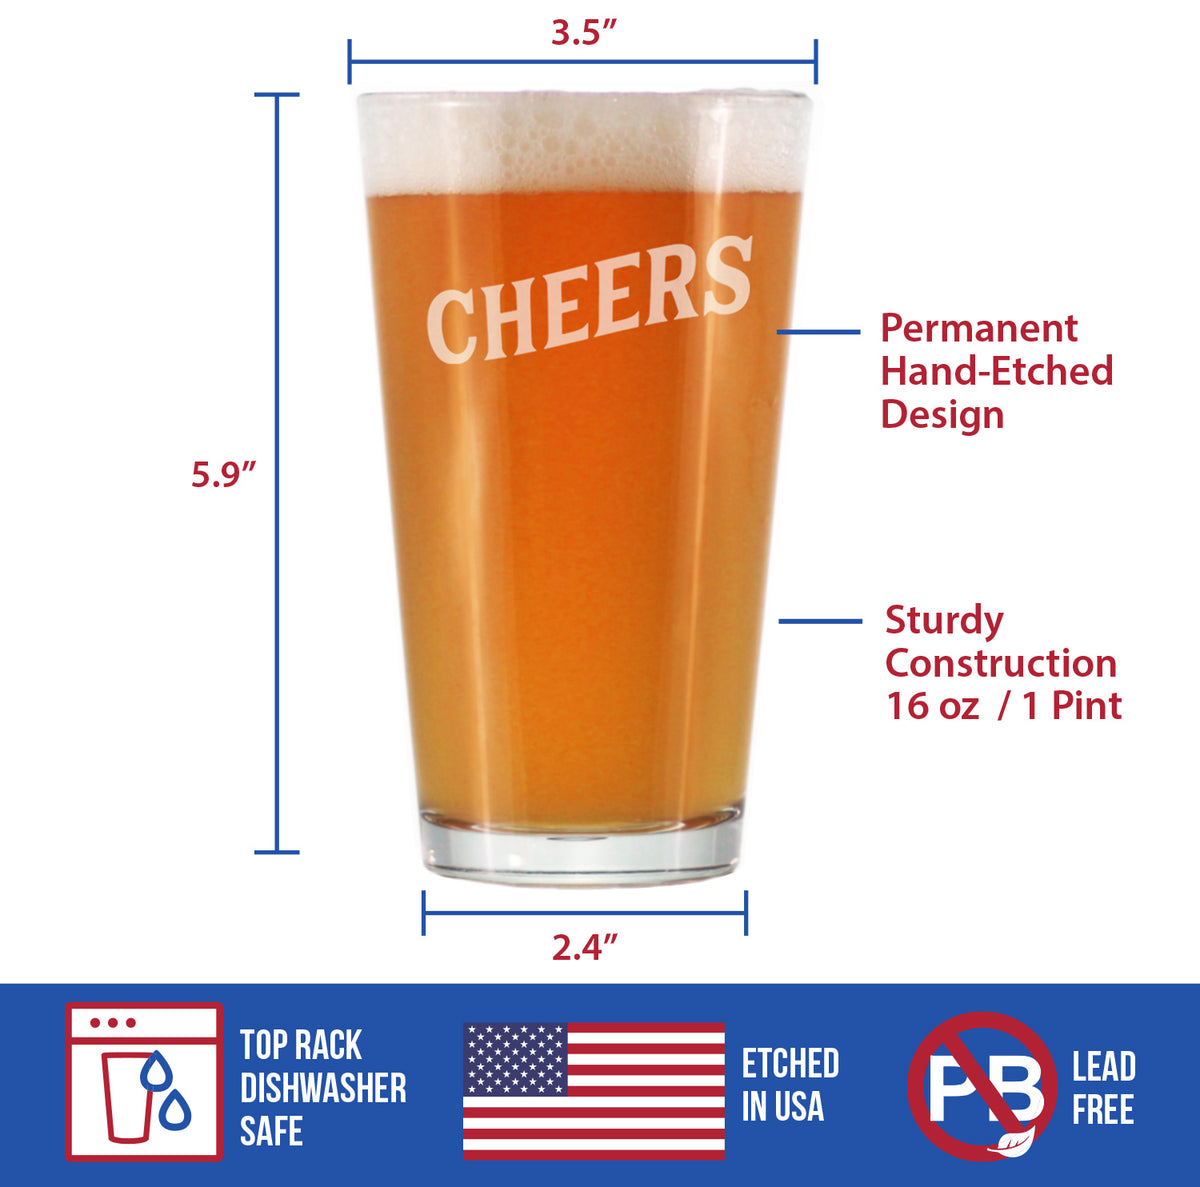 Cheers - Pint Glass - Cute Themed Gifts or Party Decor for Women and Men - 16 Oz